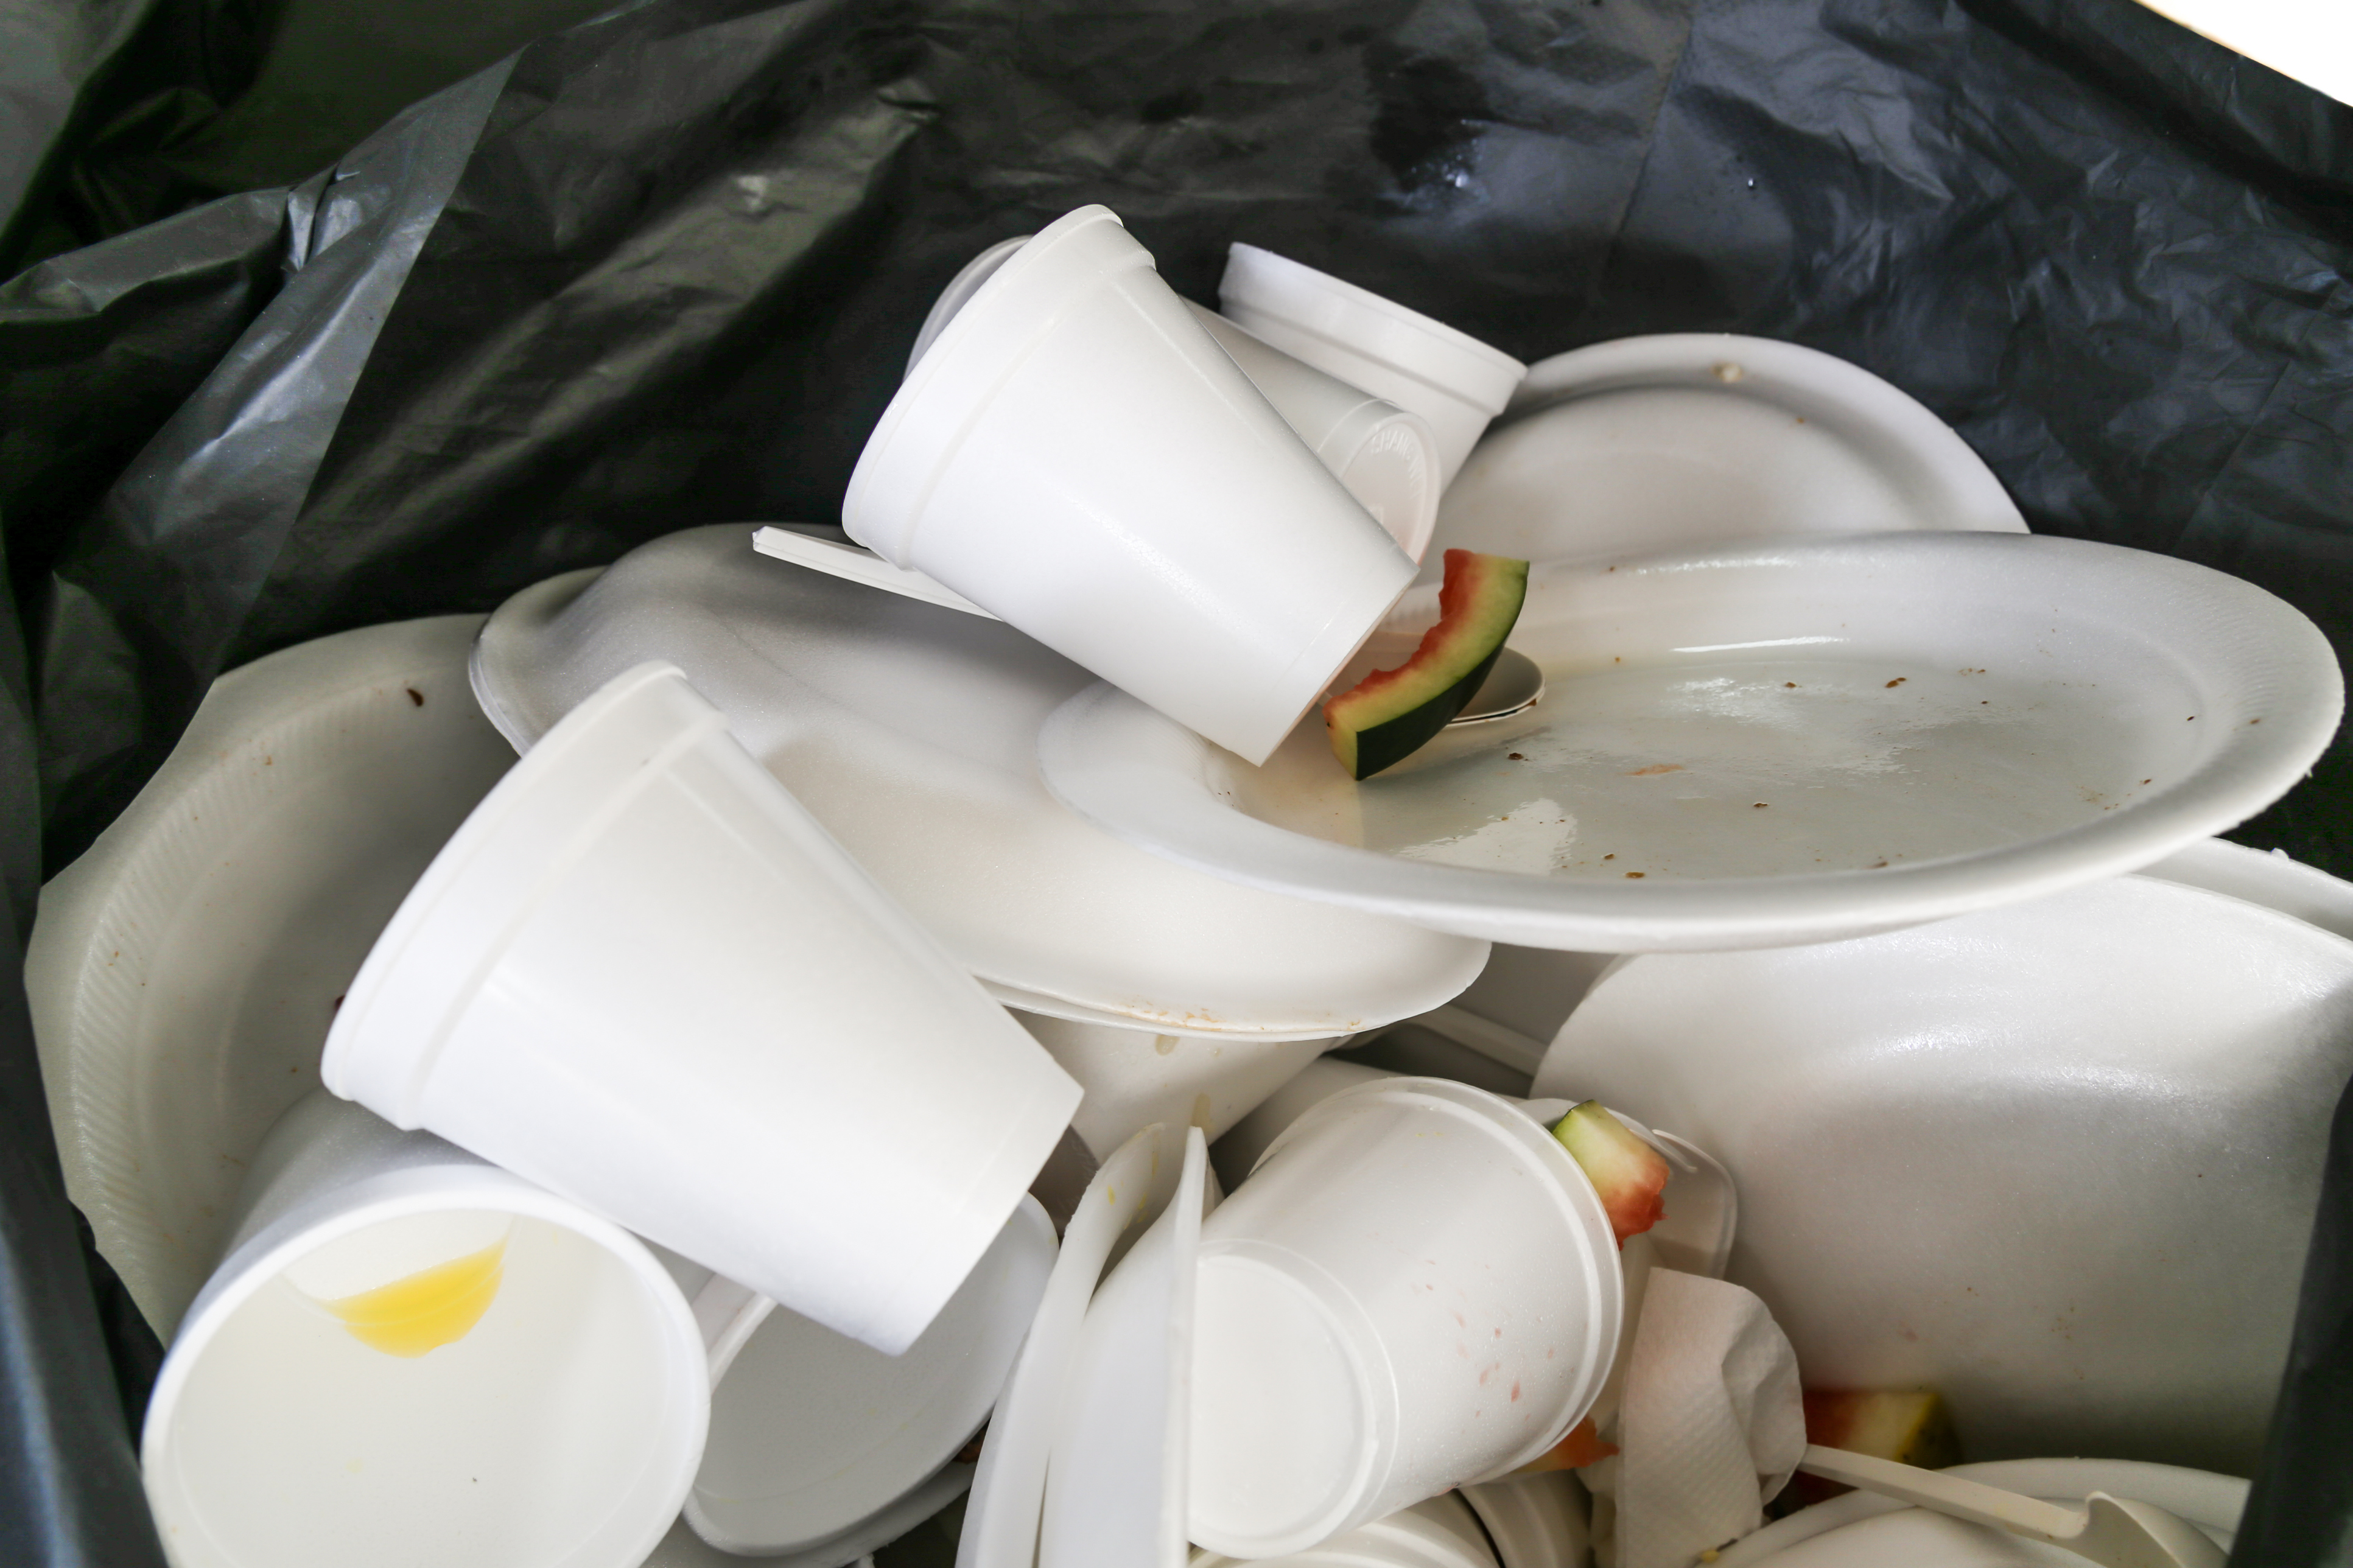 Styrofoam is polluting our environment. Let's #BanTheFoam. - Environmental  Defence